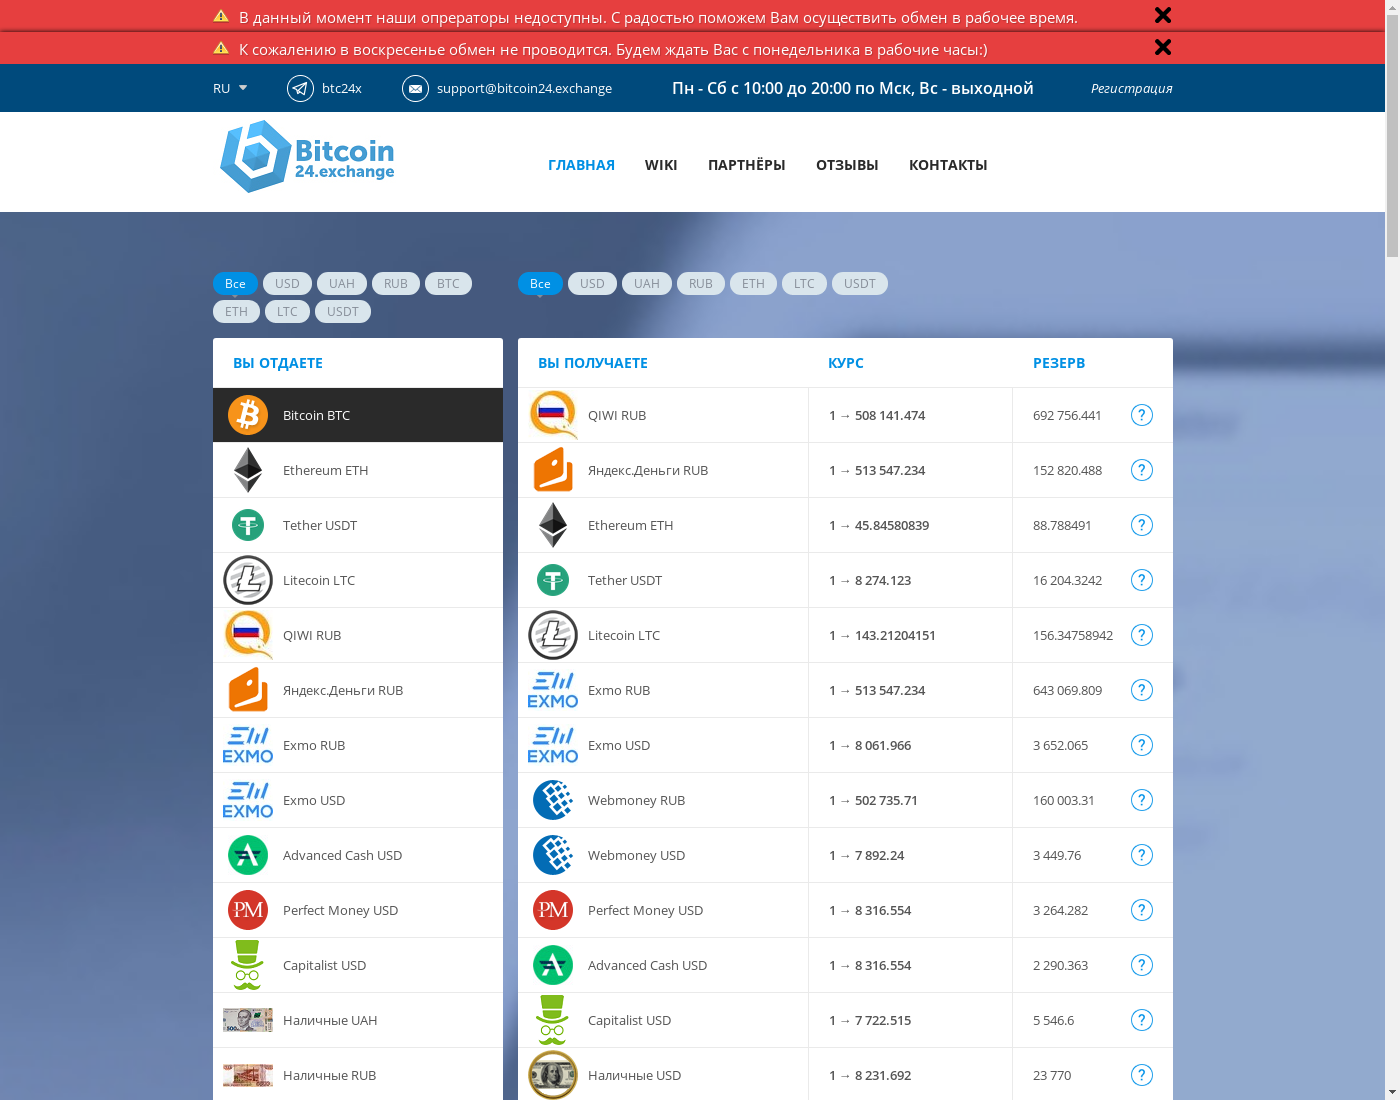 bitcoin24exchange user interface: the home page in English